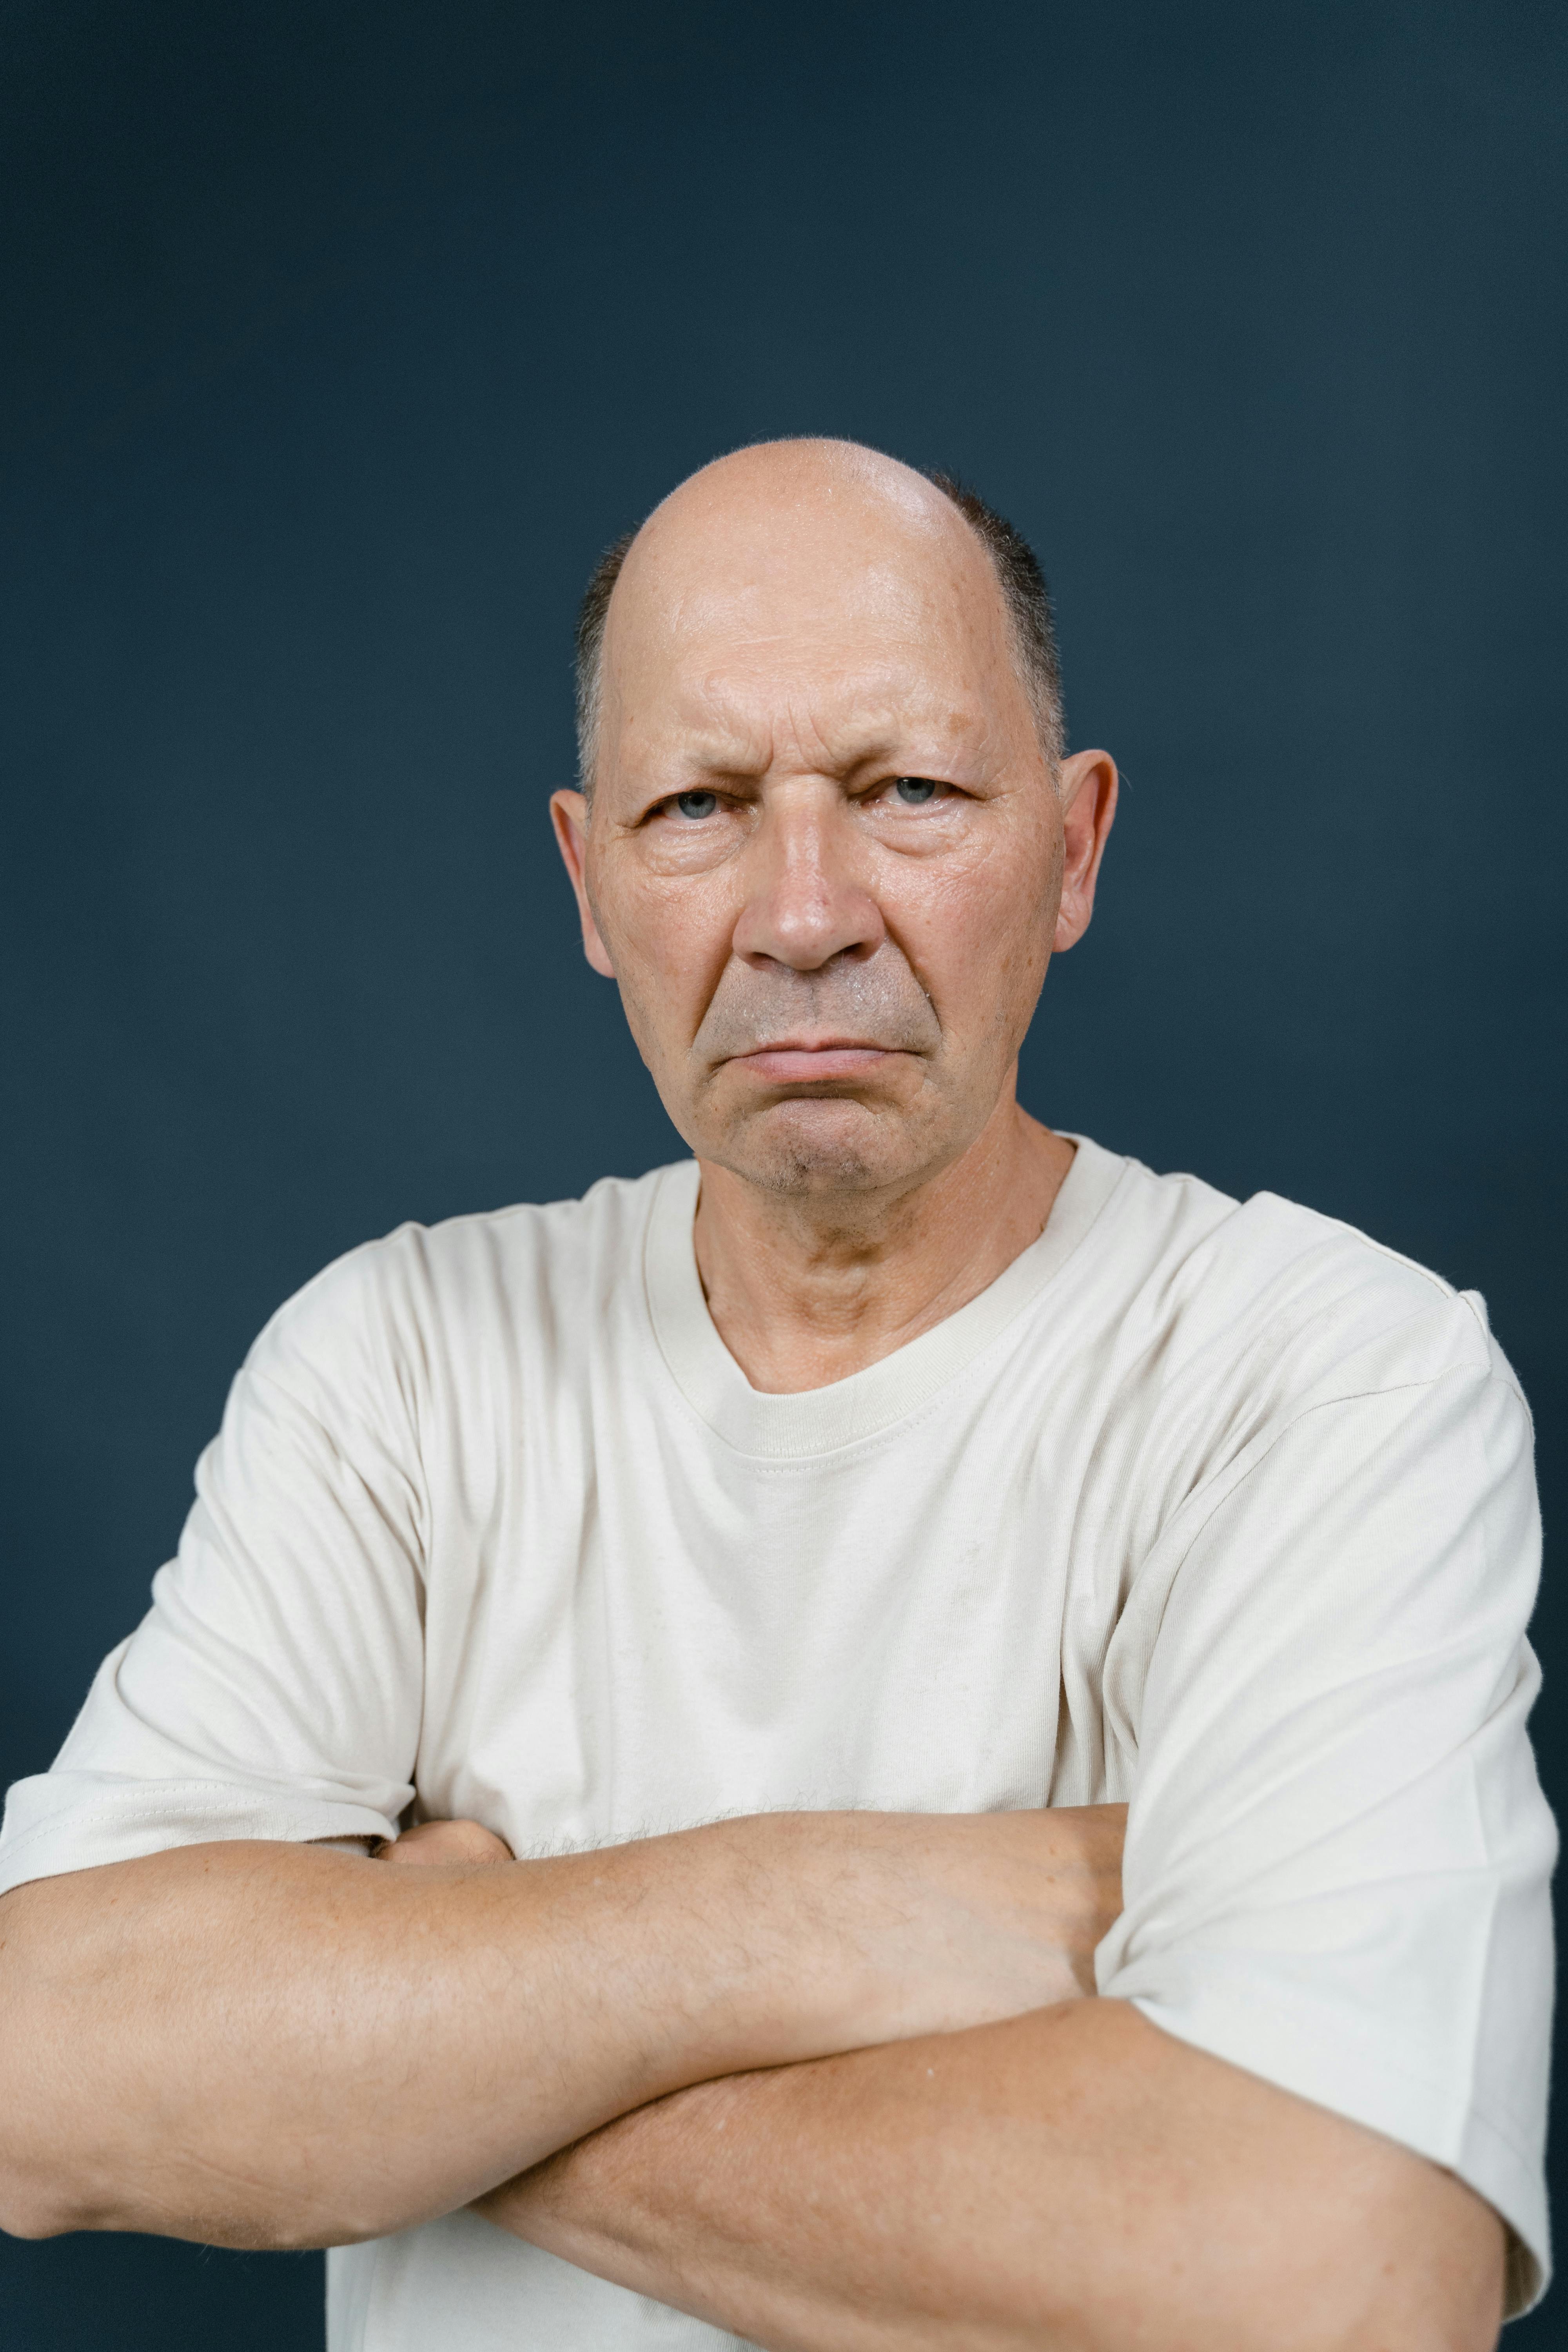 An angry older man with his arms crossed | Source: Pexels